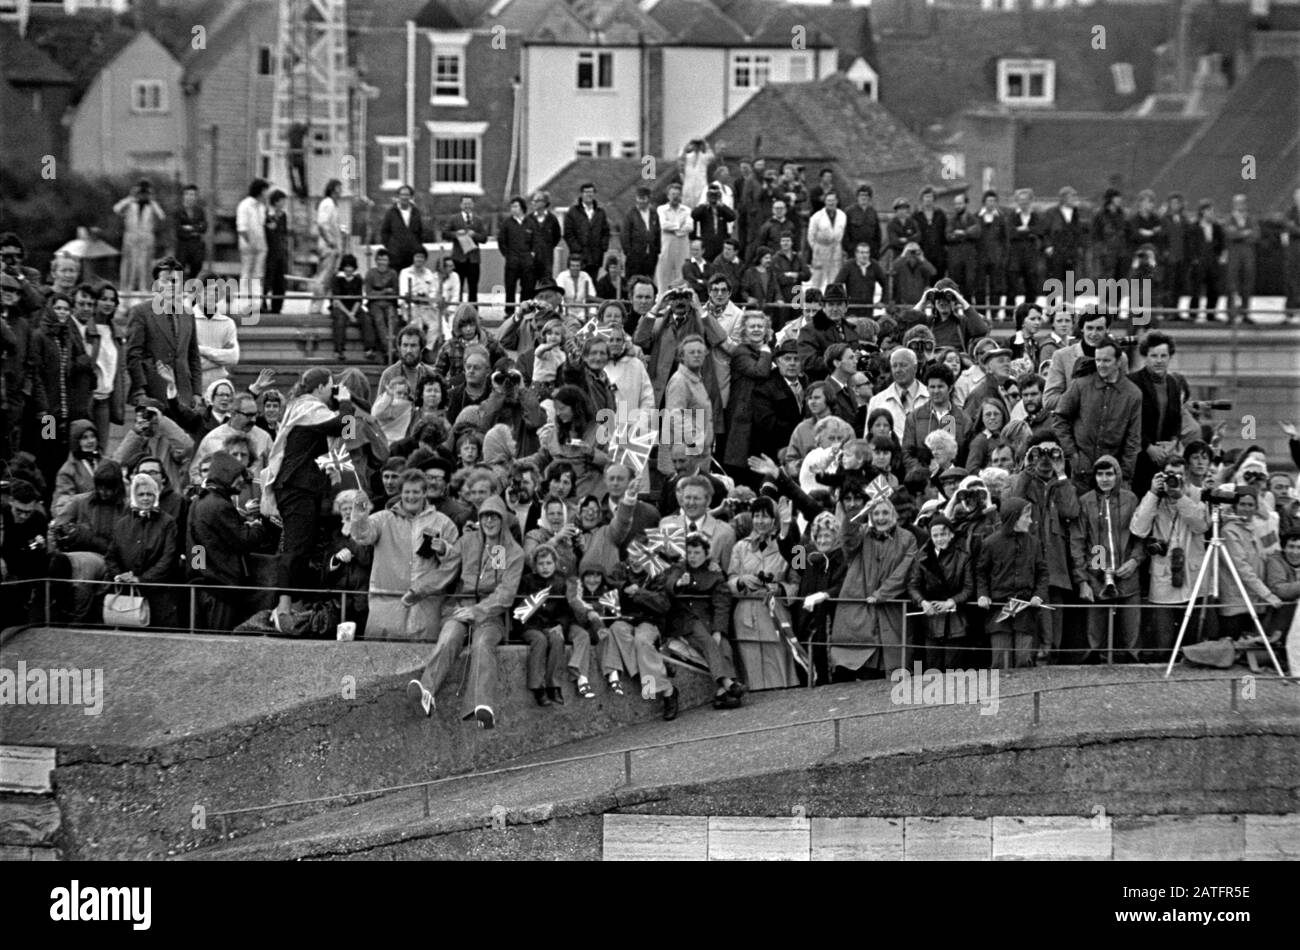 AJAXNETPHOTO. JUNE, 1977. PORTSMOUTH, ENGLAND. - CROWDED TOWER - KING HENRY VIII ROUND TOWER AT THE HARBOUR ENTRANCE FILLED WITH PEOPLE SPECTATING THE DEPARTURE OF SHIPS HEADING FOR SPITHEAD ANCHORAGE AND QUEEN'S SILVER JUBILEE REVIEW. VOSPER THORNYCROFT WORKERS CAN BE SEEN BACKGROUND STANDING ON WORKSHOP ROOF.PHOTO:JONATHAN EASTLAND/AJAX REF:772606 15001 Stock Photo